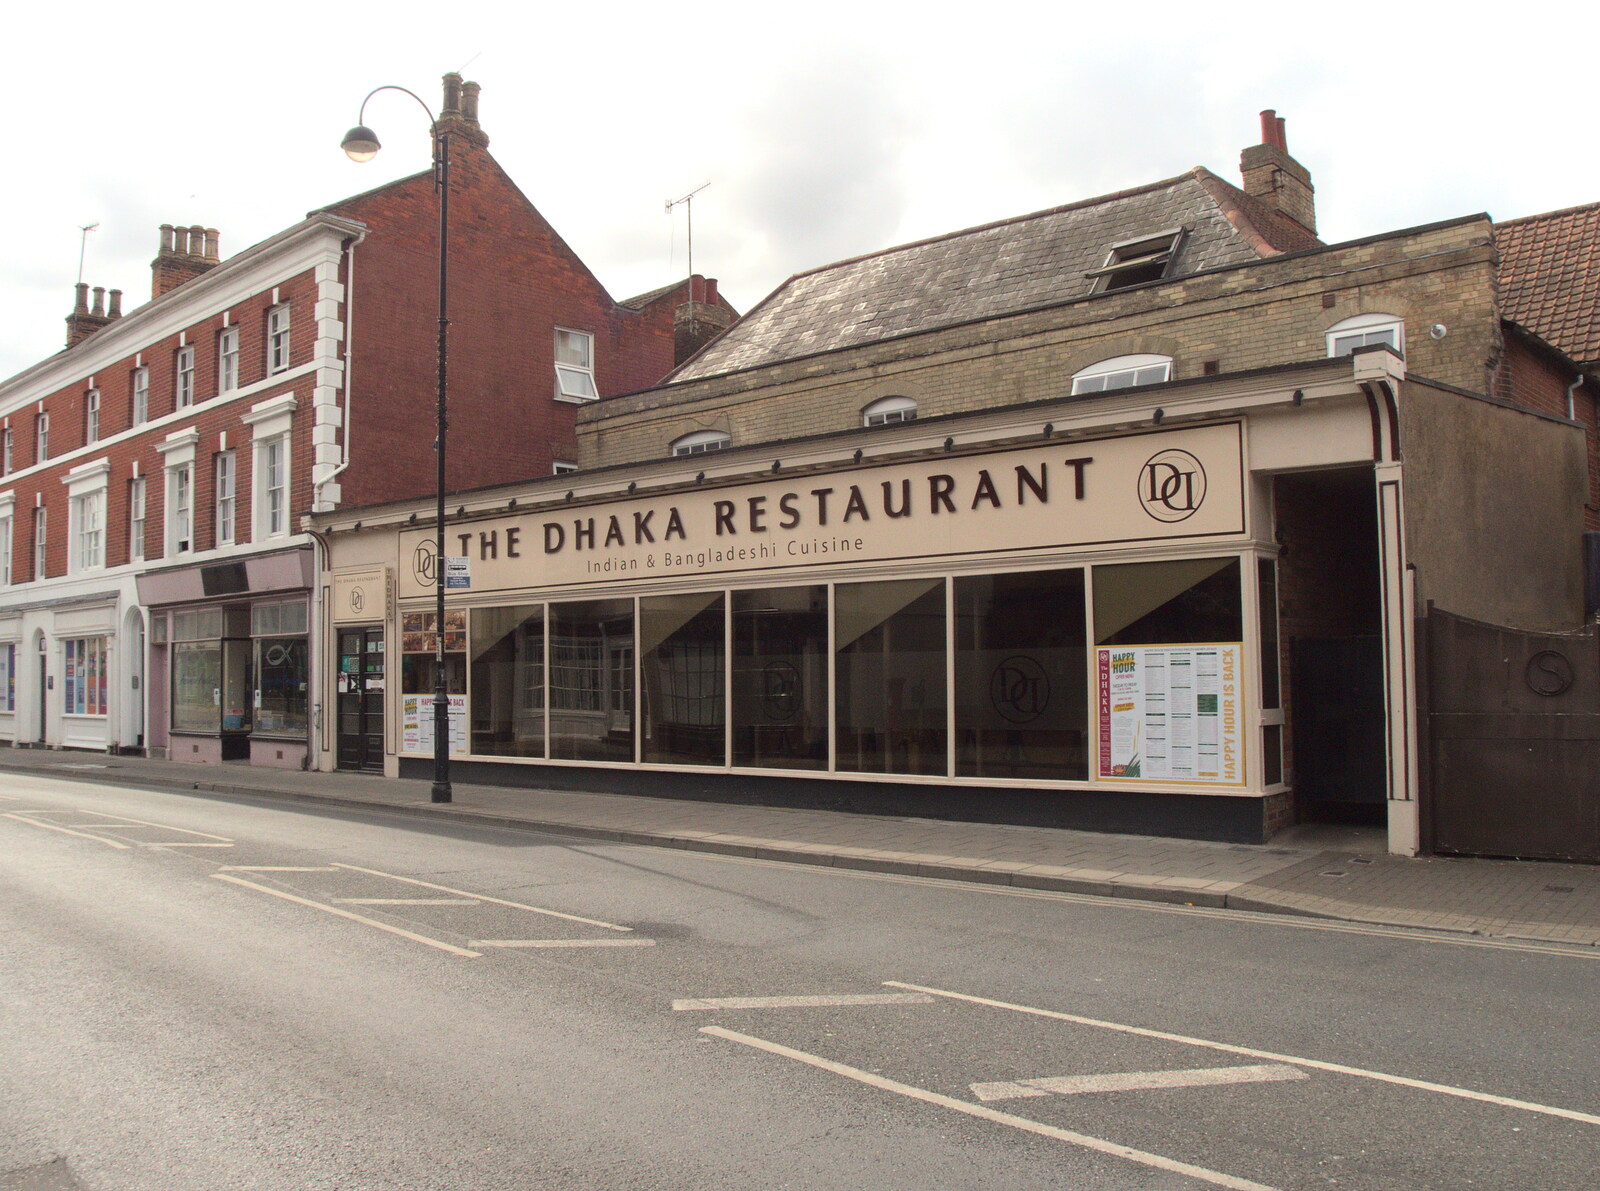 The Eye Piggy Tail Trail and Ipswich Dereliction, Suffolk - 29th July 2022: The Dhaka Restaurant is still going